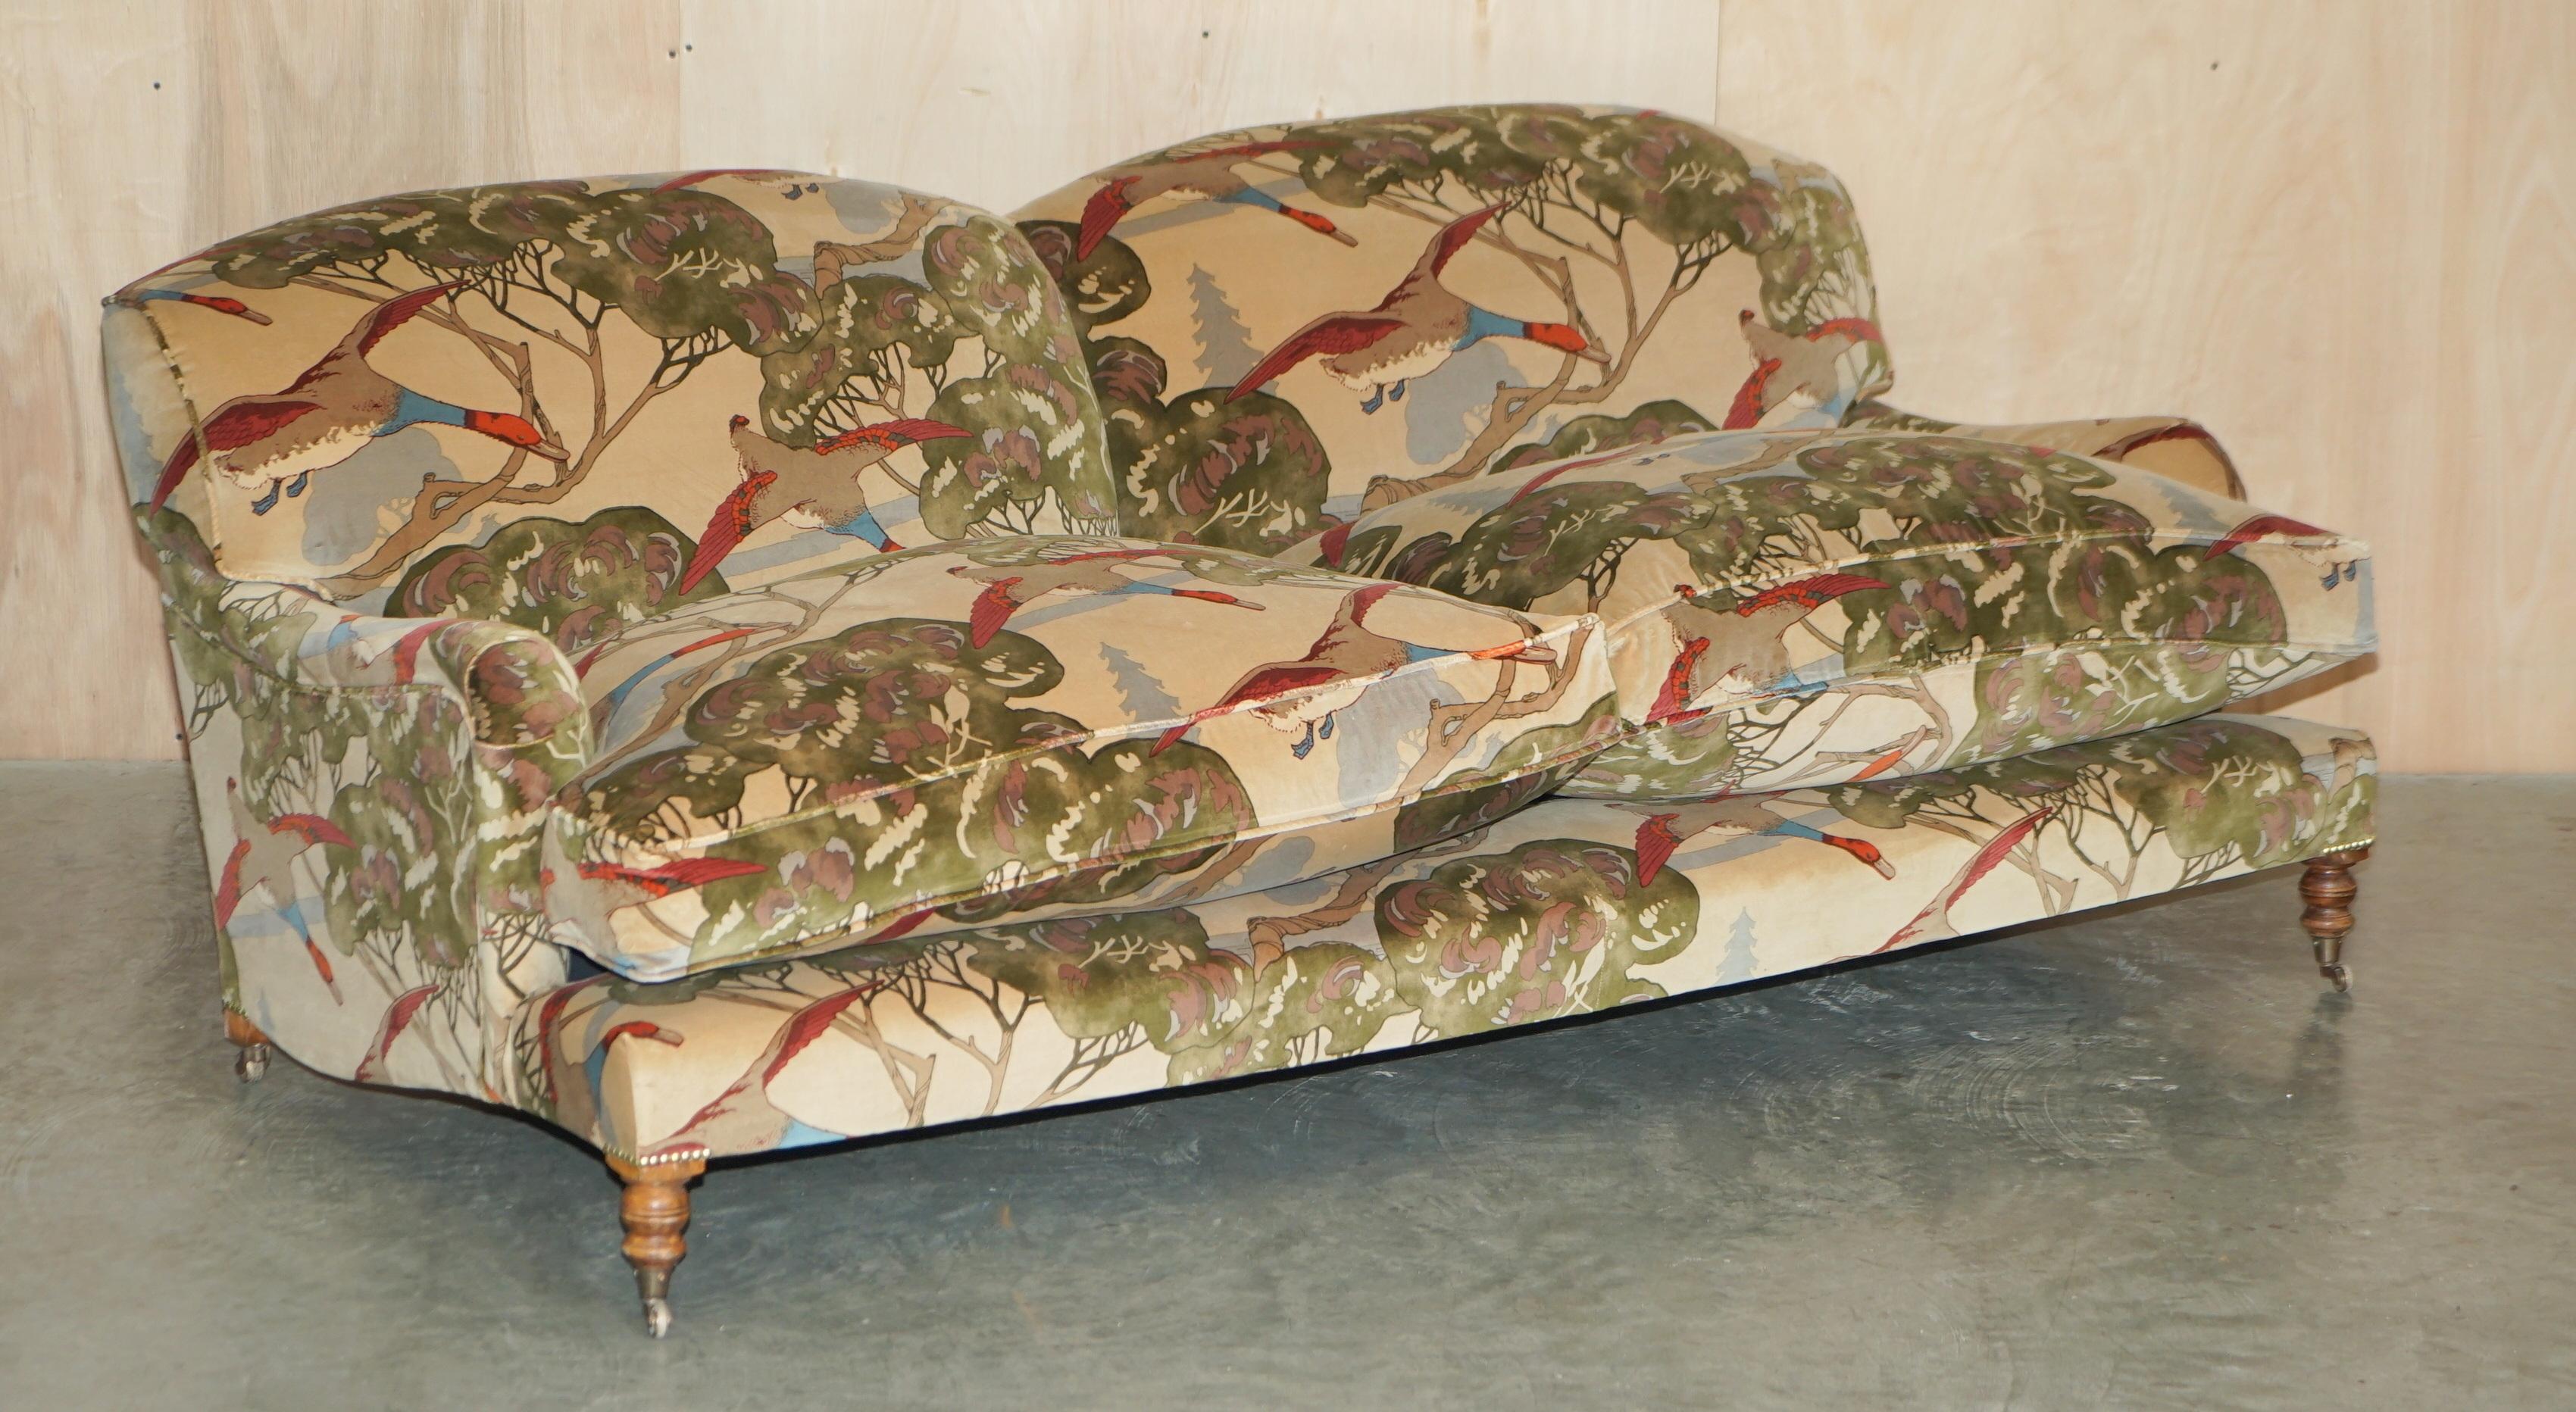 Royal House Antiques

Royal House Antiques is delighted to offer for sale this brand new, George Smith Signature Scroll Arm large sofa with feather filled back and base cushions upholstered with the exceptionally luxury Mulberry Flying Ducks